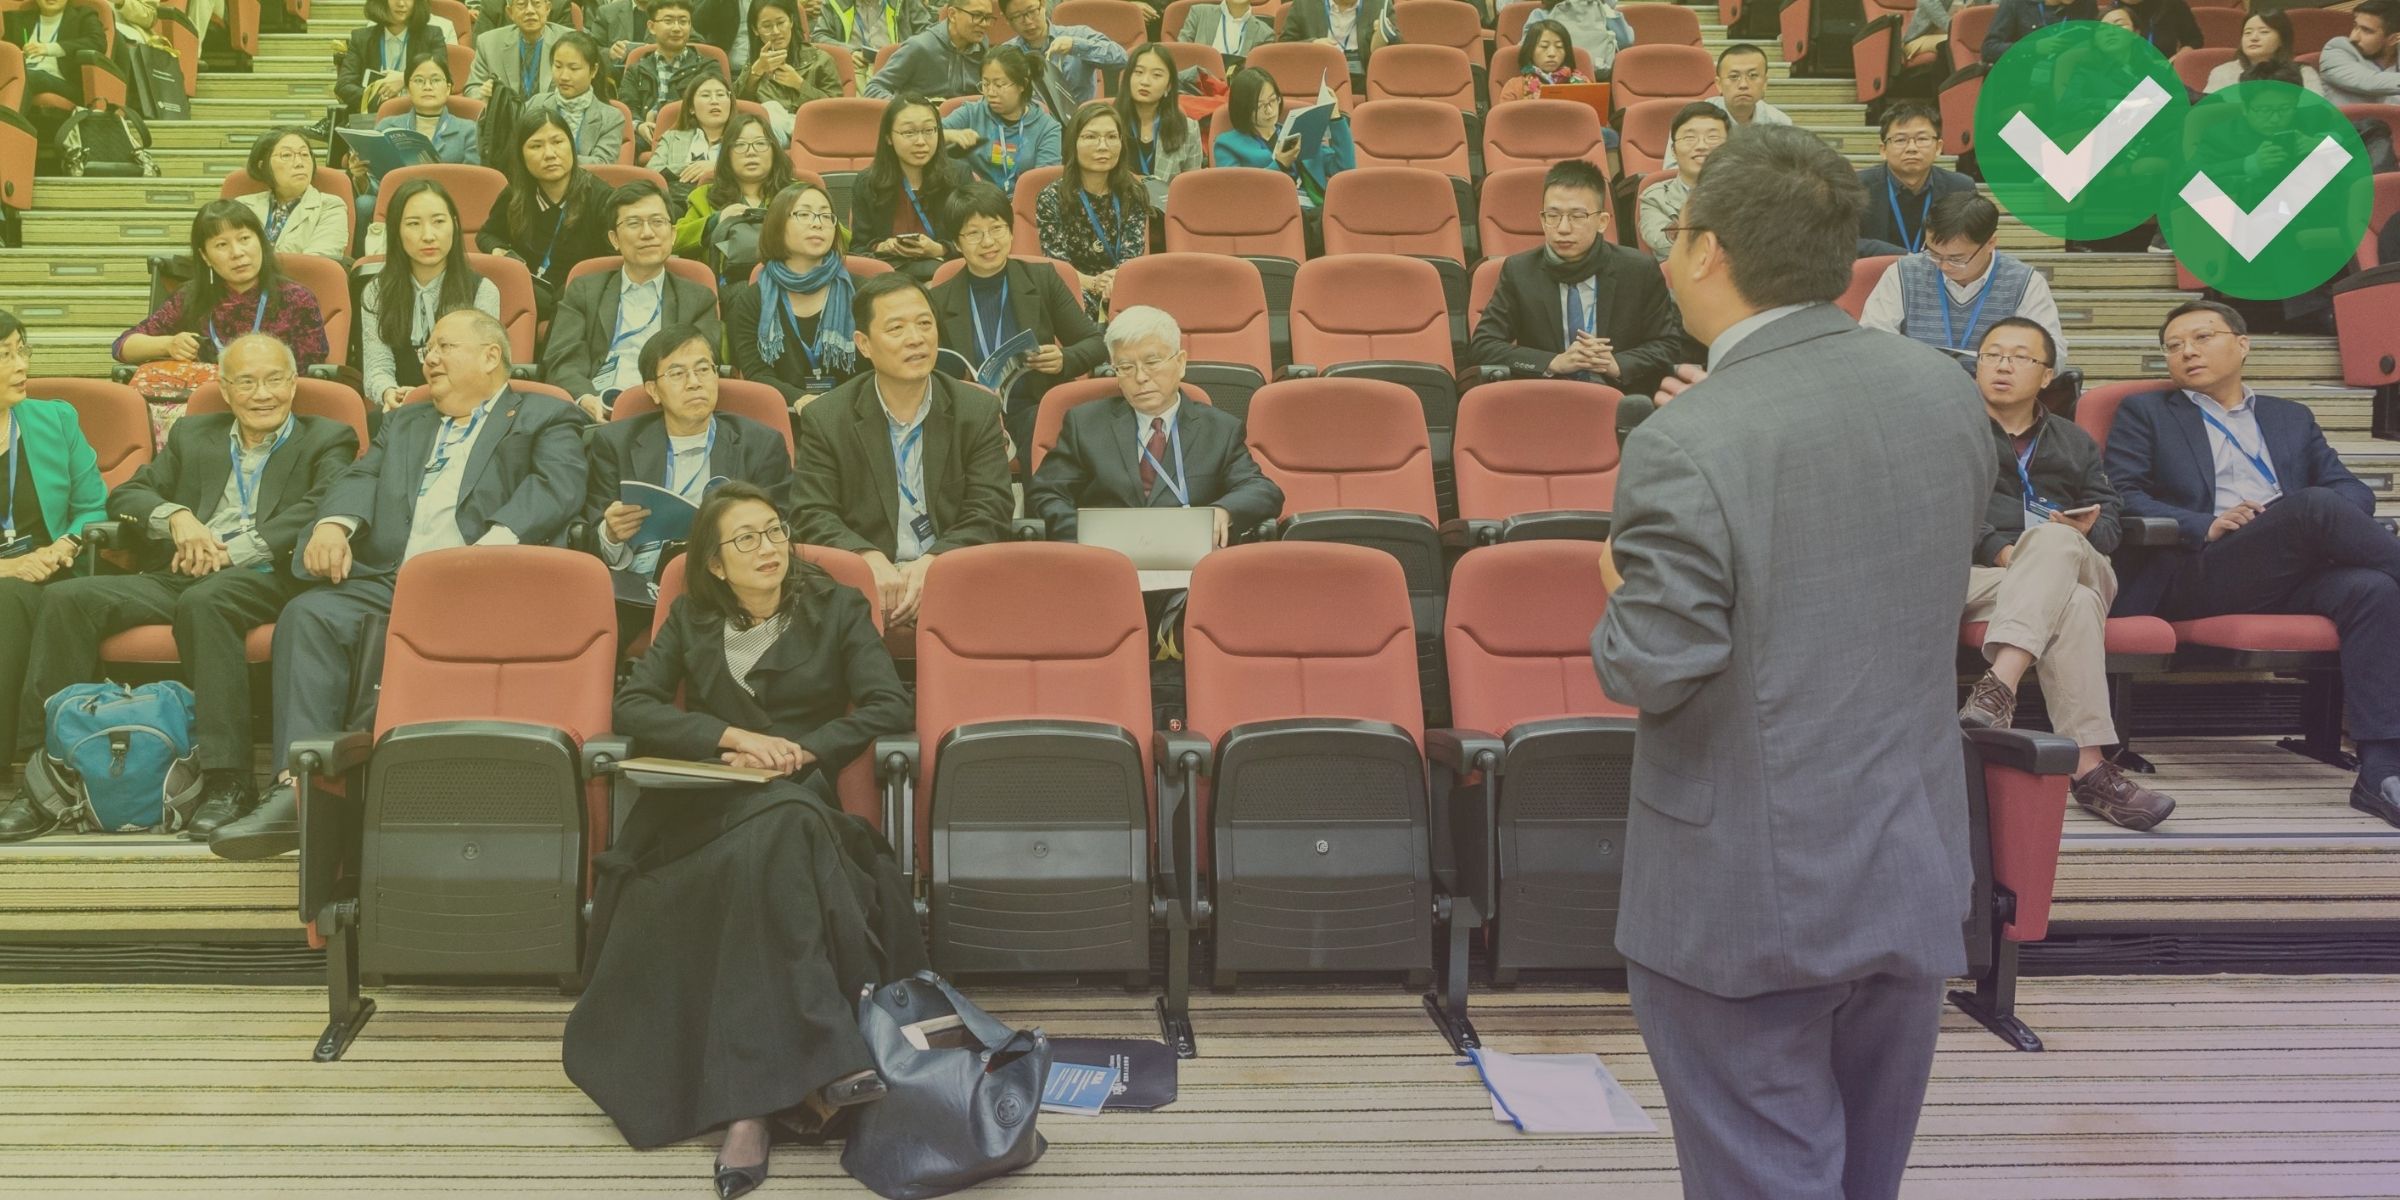 Speaker faces an auditorium of adult students representing the TOEFL speaking template - image by Magoosh